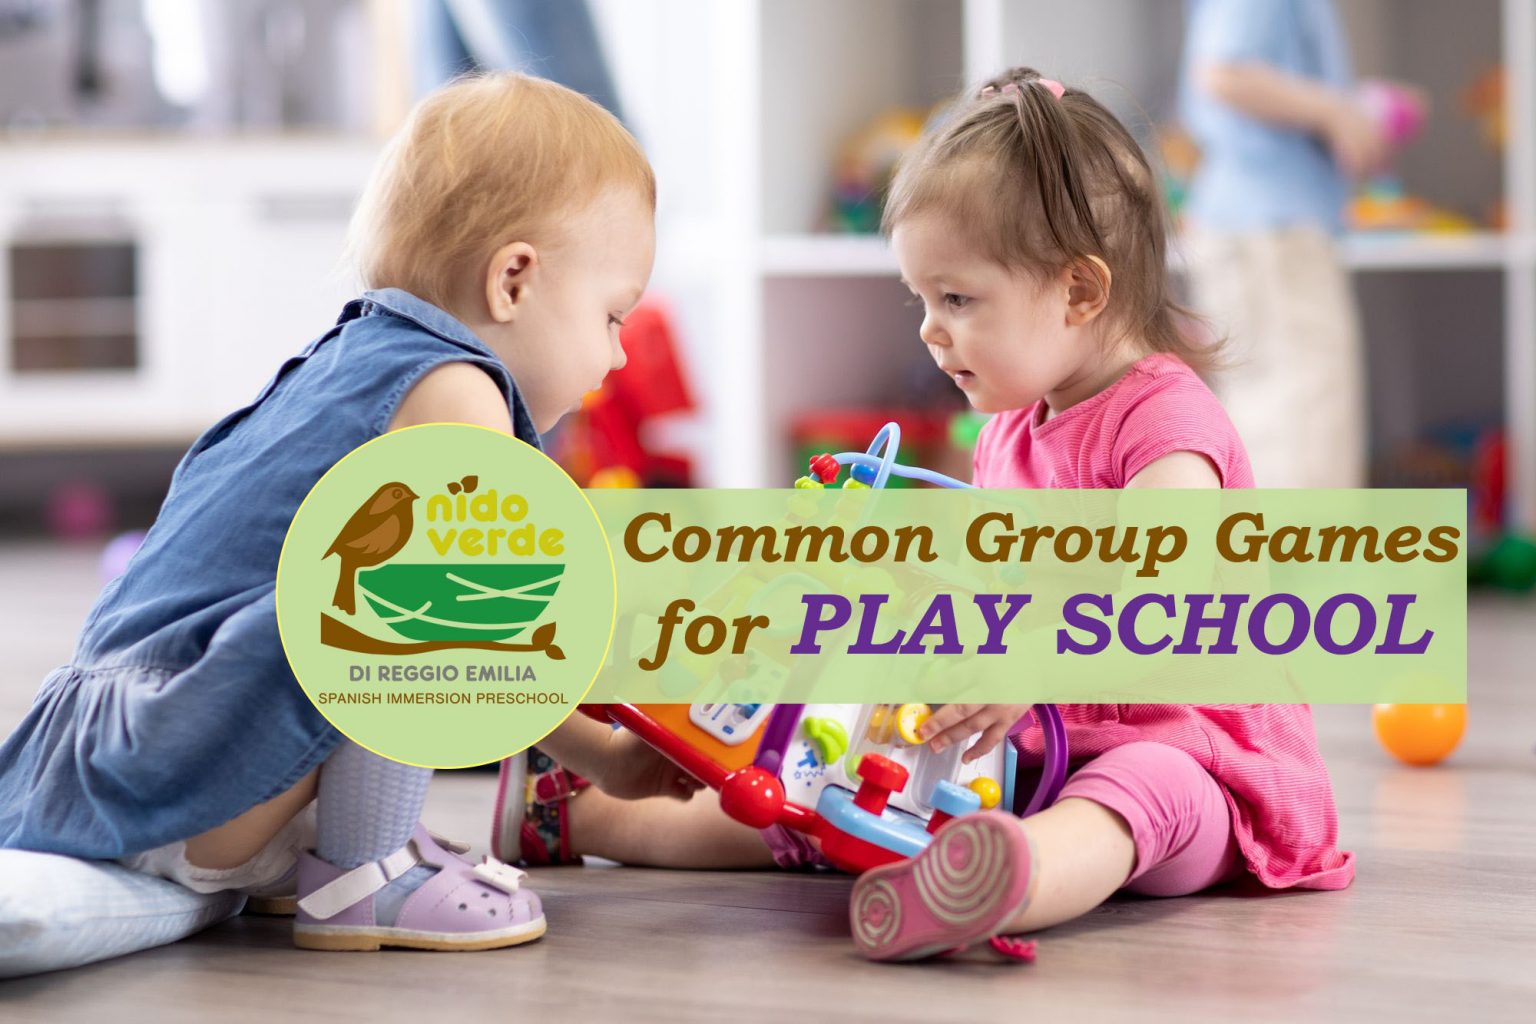 Common Group Games For Play School 1536x1024 